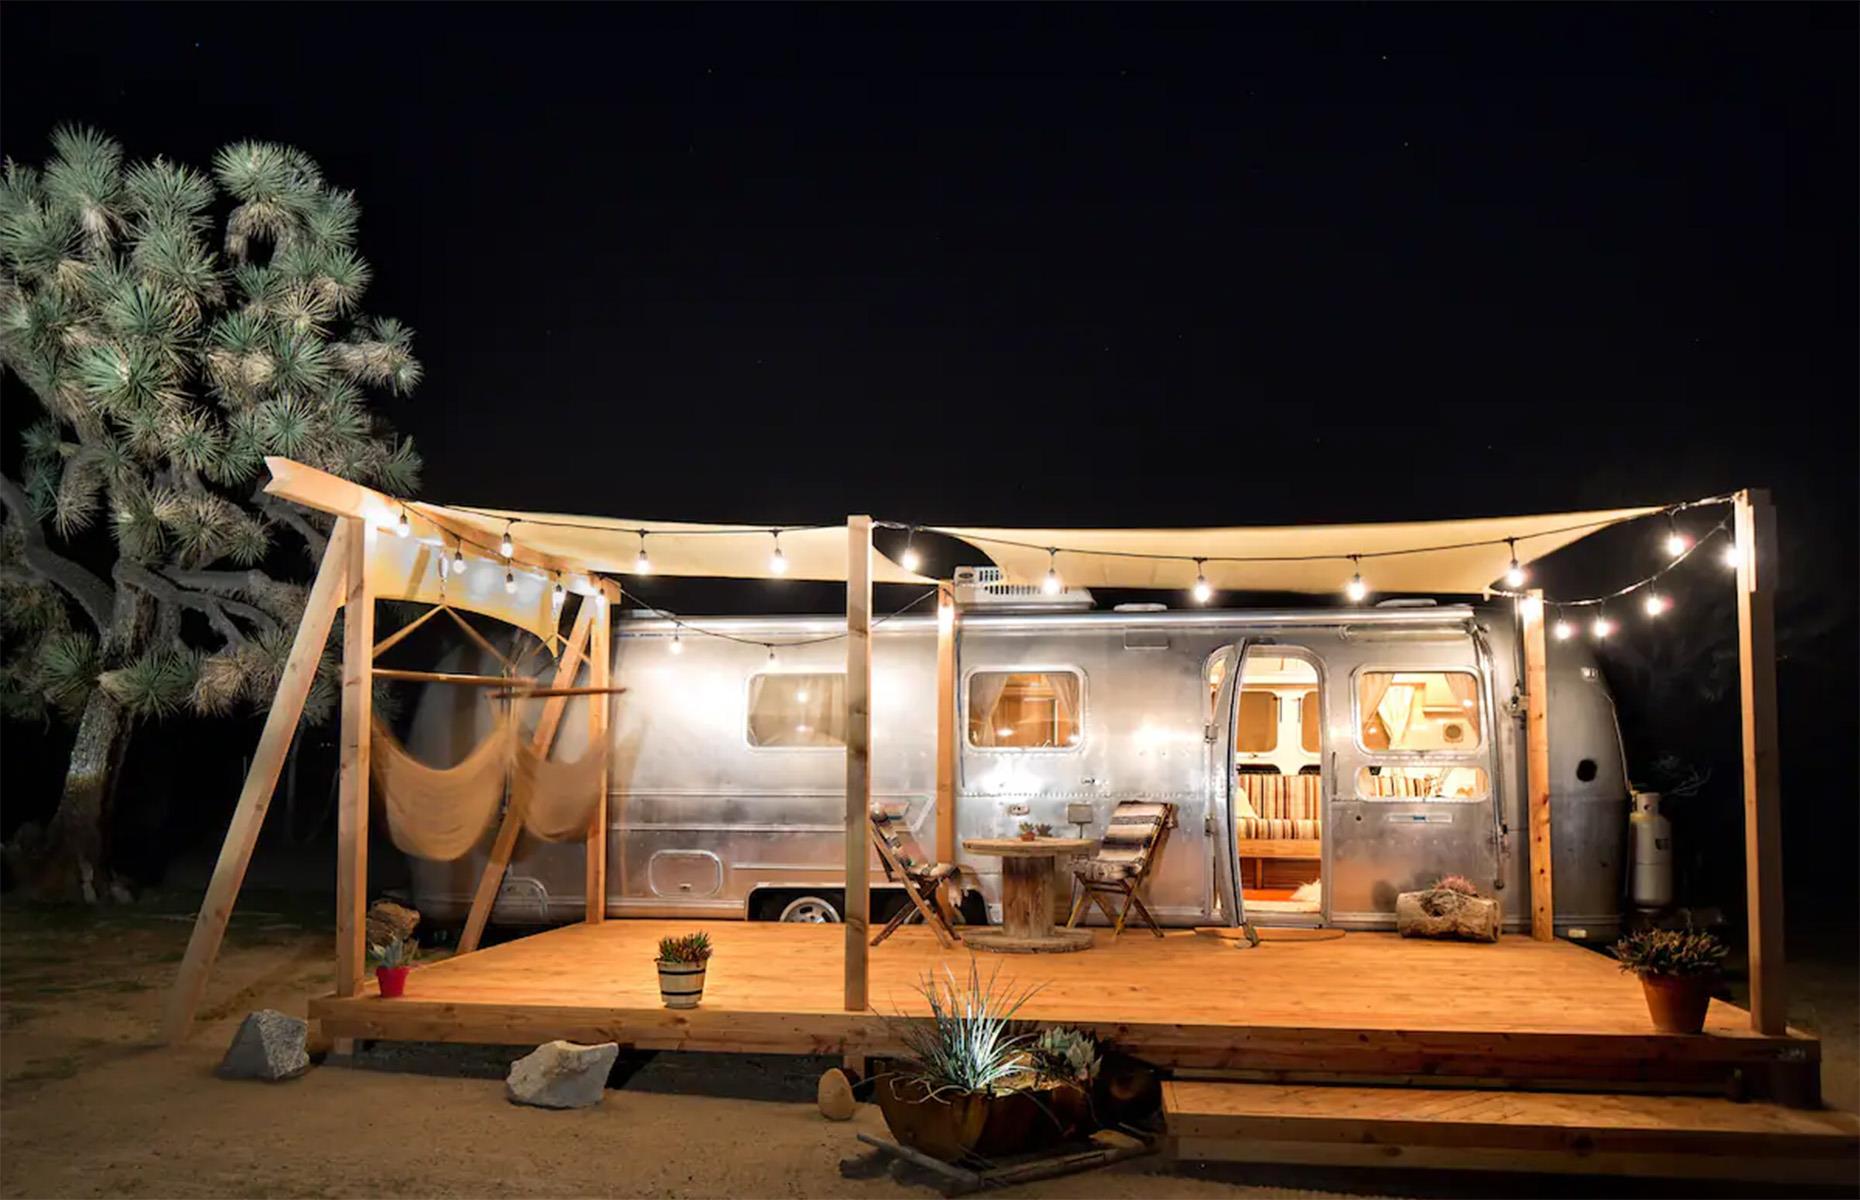 <p>Unlike some of the more modernised trailer projects we’ve seen, this fabulous 1975 Airstream truly embraces its origins with a renovation that's faithful to its playful heyday.</p>  <p>Alongside that beautifully restored exterior, there's a large wooden deck adorned with shade sails, fairy lights and two hammocks – perfect for a cosy evening of stargazing.</p>